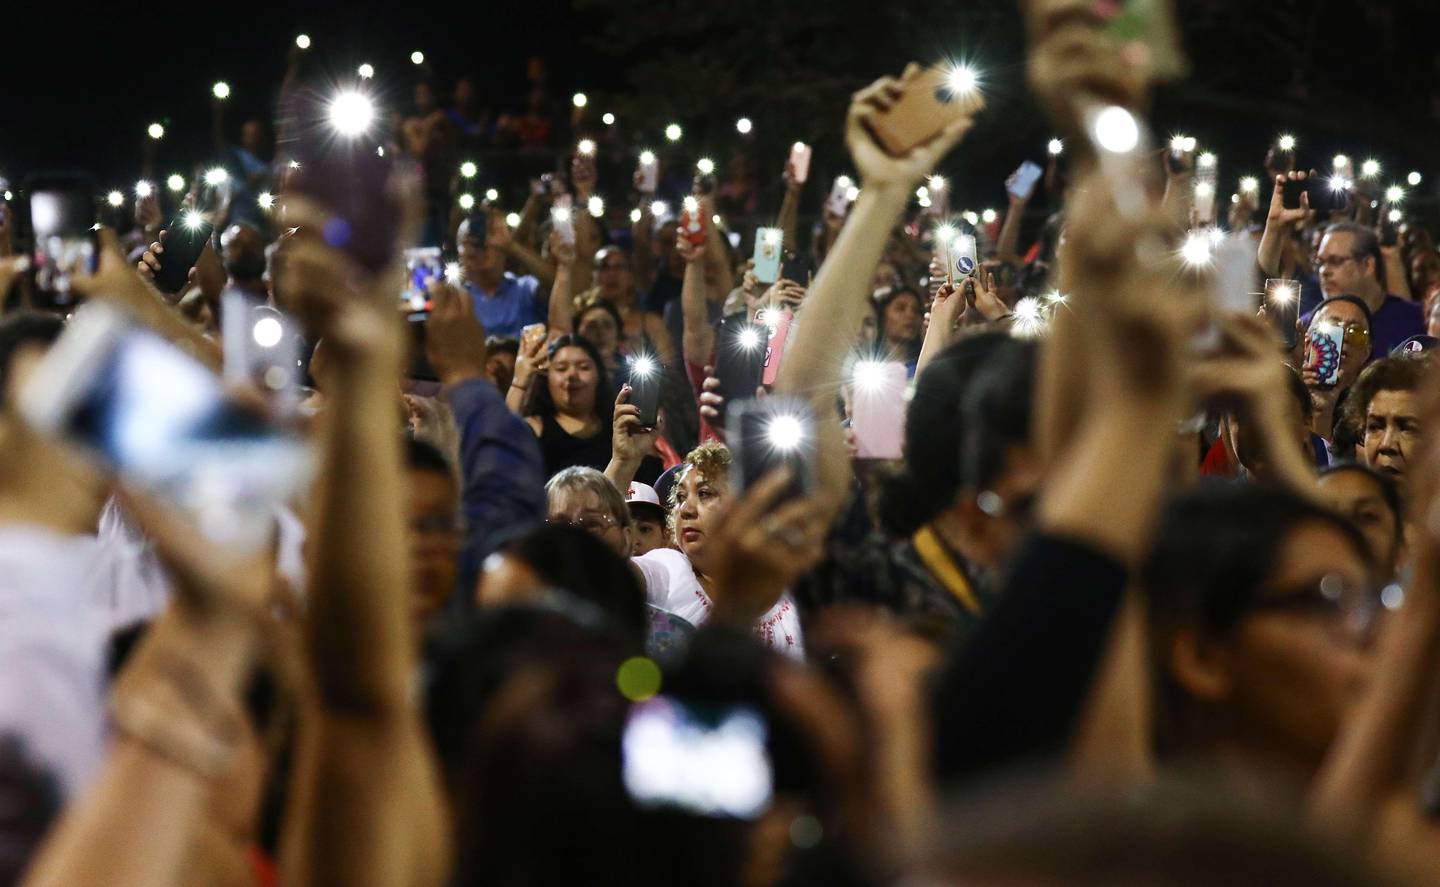 EL PASO, TEXAS - AUGUST 04: People hold up their phones in lieu of candles at an interfaith vigil for victims of a mass shooting, which left at least 20 people dead, on August 4, 2019 in El Paso, Texas. A 21-year-old male suspect was taken into custody in the city which sits along the U.S.-Mexico border. At least 26 people were wounded.   Mario Tama/Getty Images/AFP
== FOR NEWSPAPERS, INTERNET, TELCOS & TELEVISION USE ONLY ==